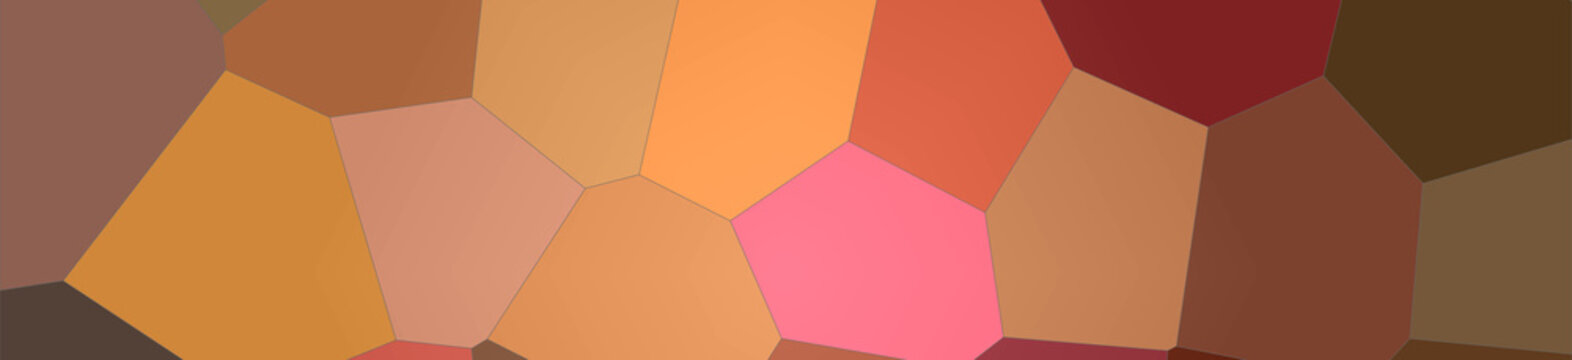 Illustration of brown and red bright Giant Hexagon banner background.